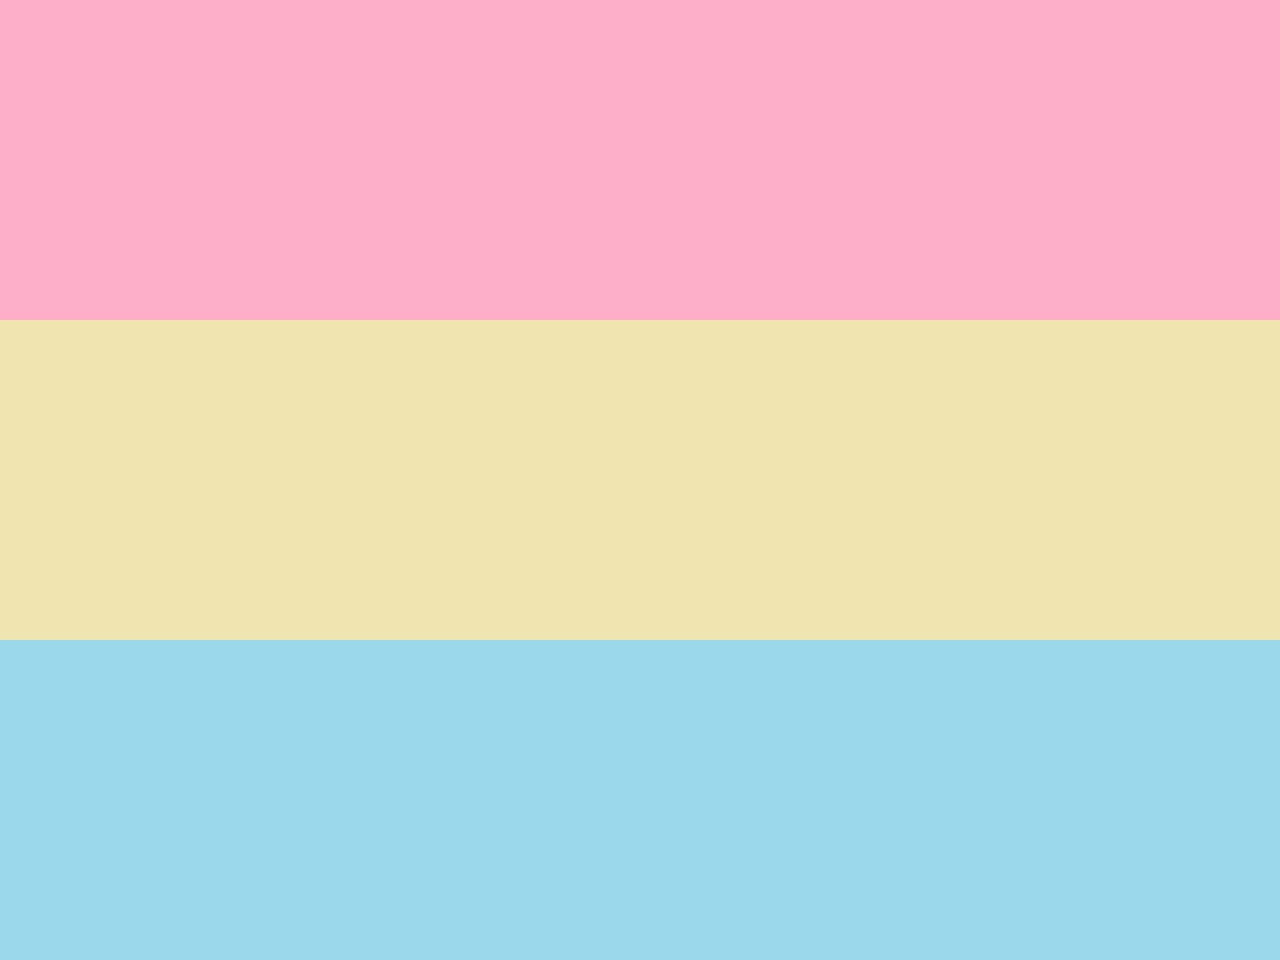 Celebrate pansexuality in all its diverse forms.